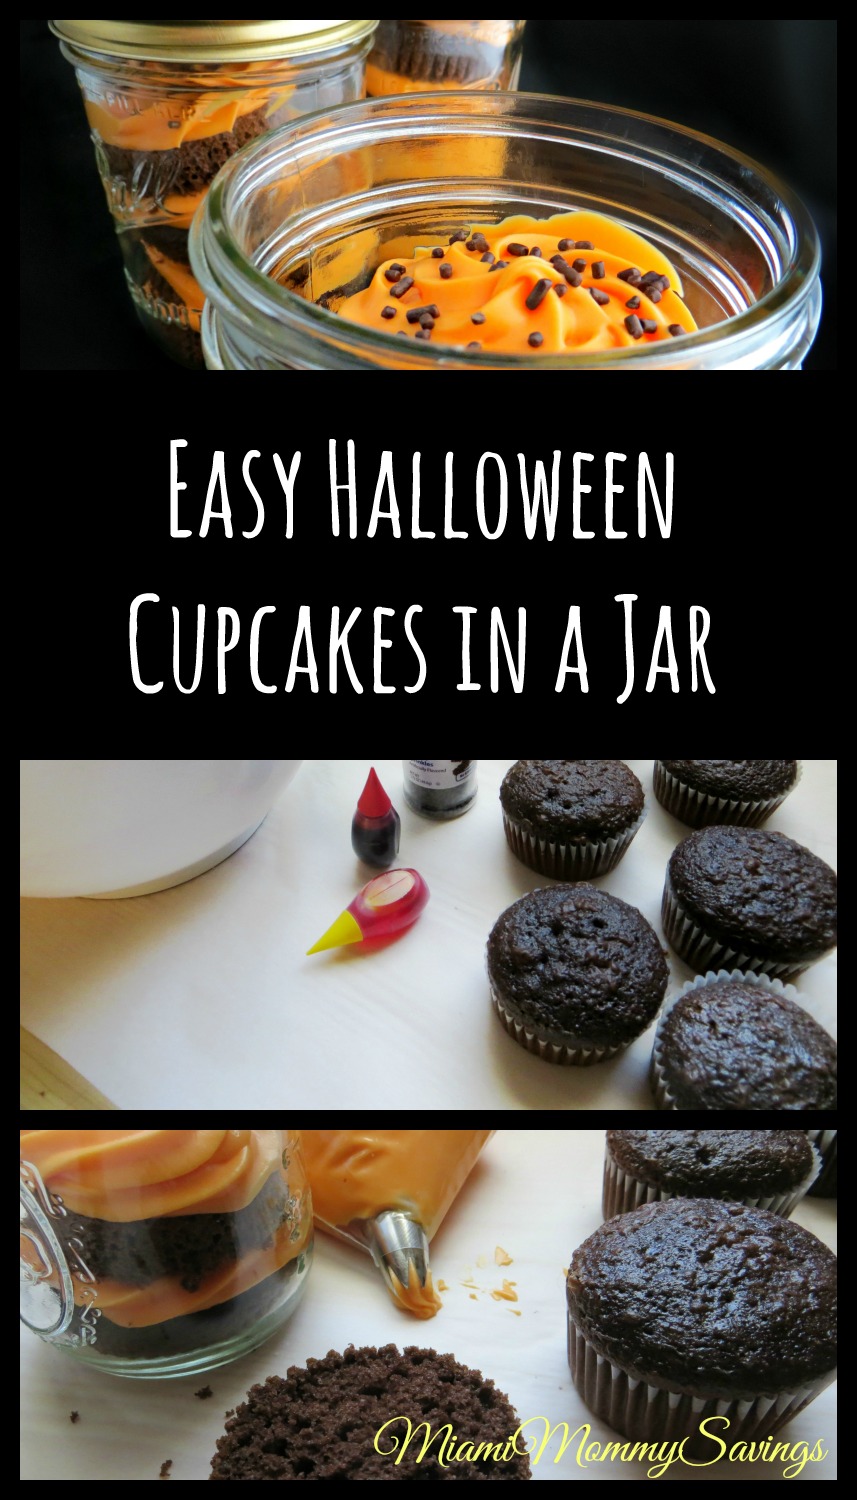 Make this Easy Halloween Cupcakes in a Jar Recipe just in time for Halloween. Get the recipe at CleverlyMe.com